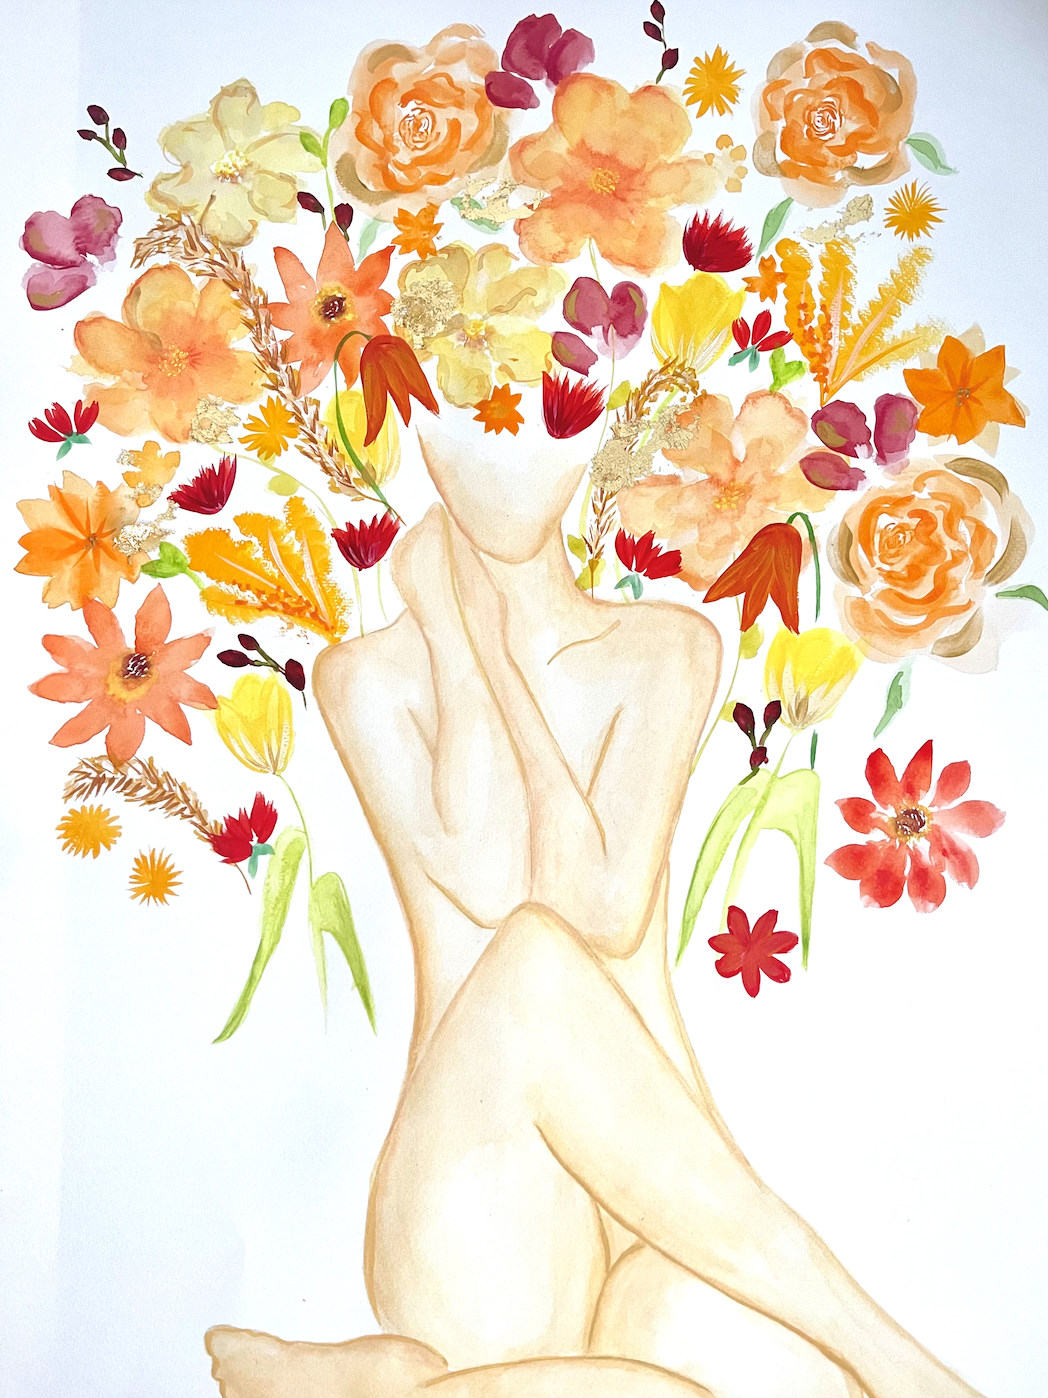 A watercolor of a nude figure with a vibrant bouquet of flowers for a head.